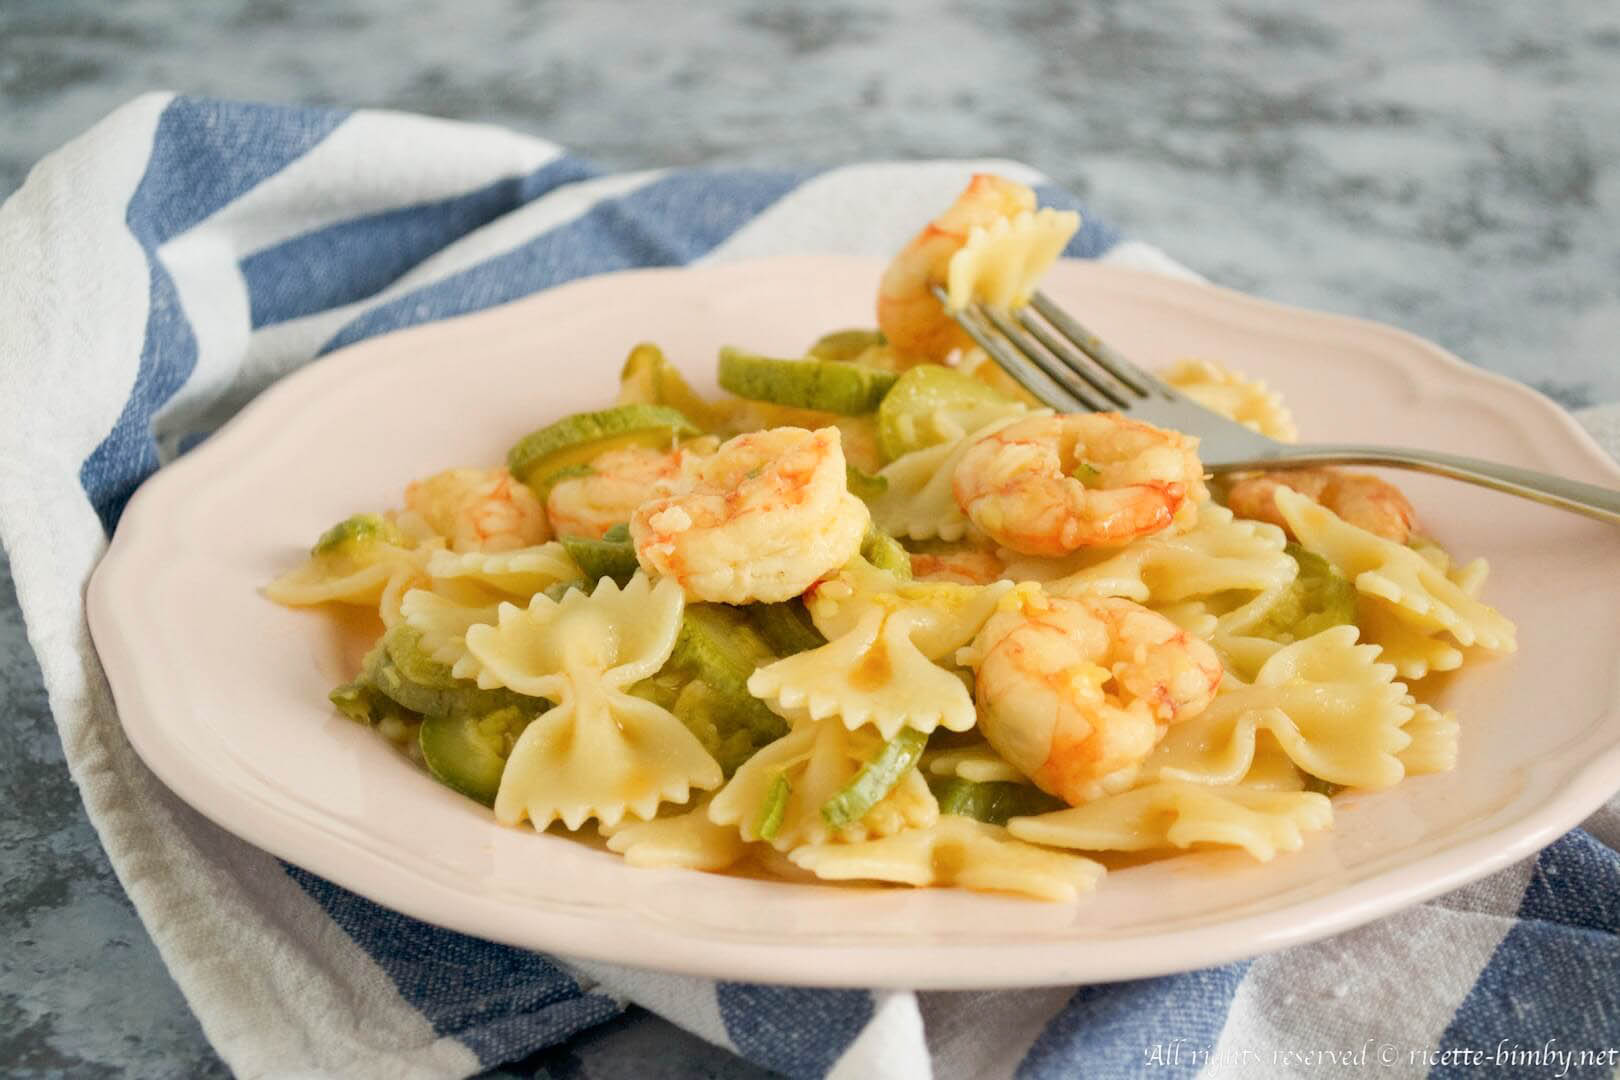 Thermomix Pasta with zucchini and shrimp